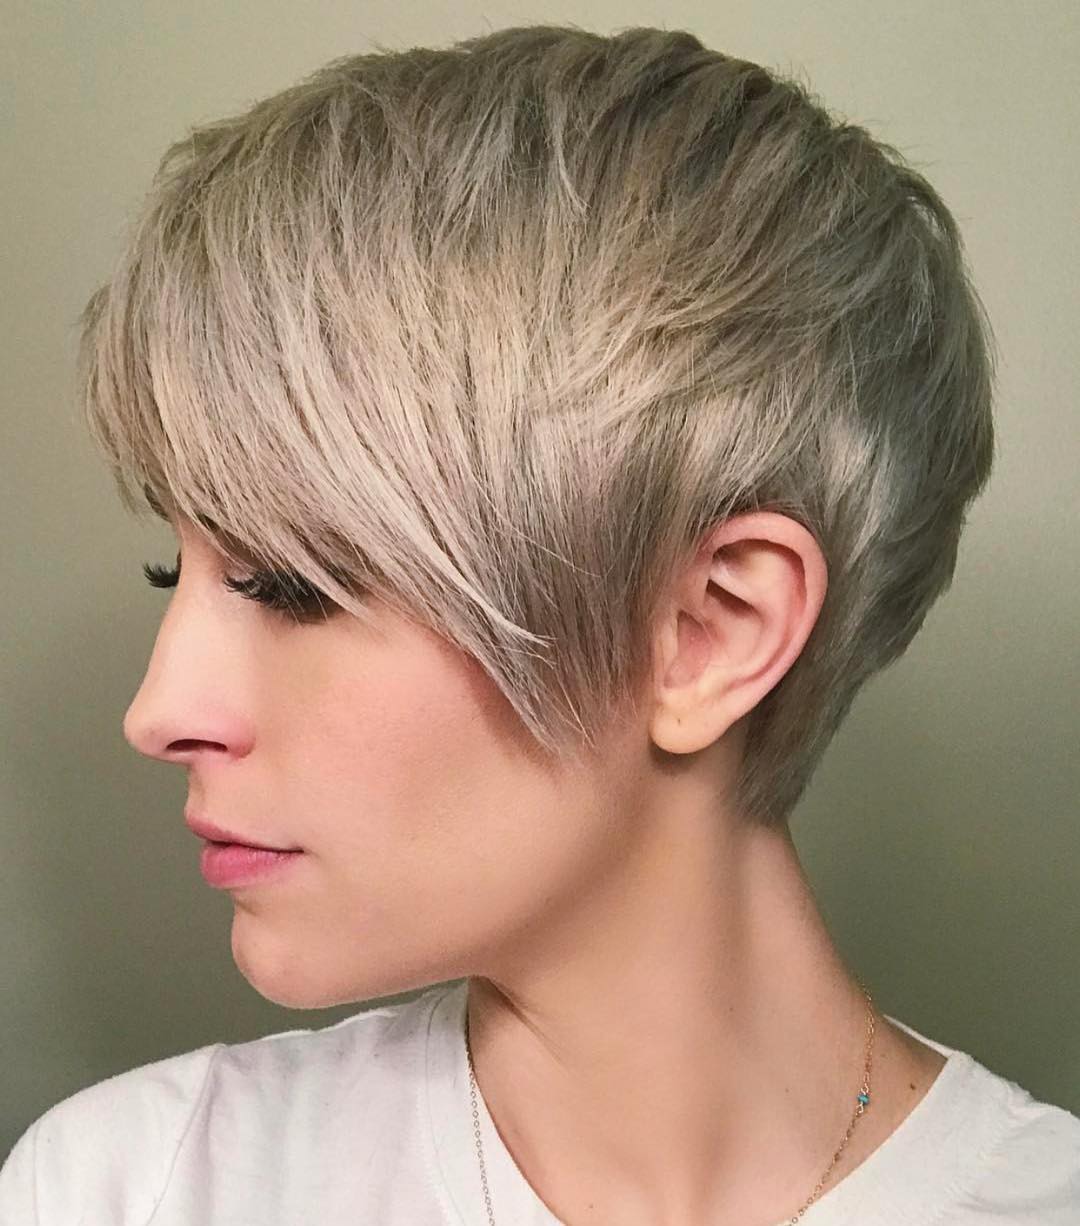 10 Best Short Straight Hairstyle Trends 2020